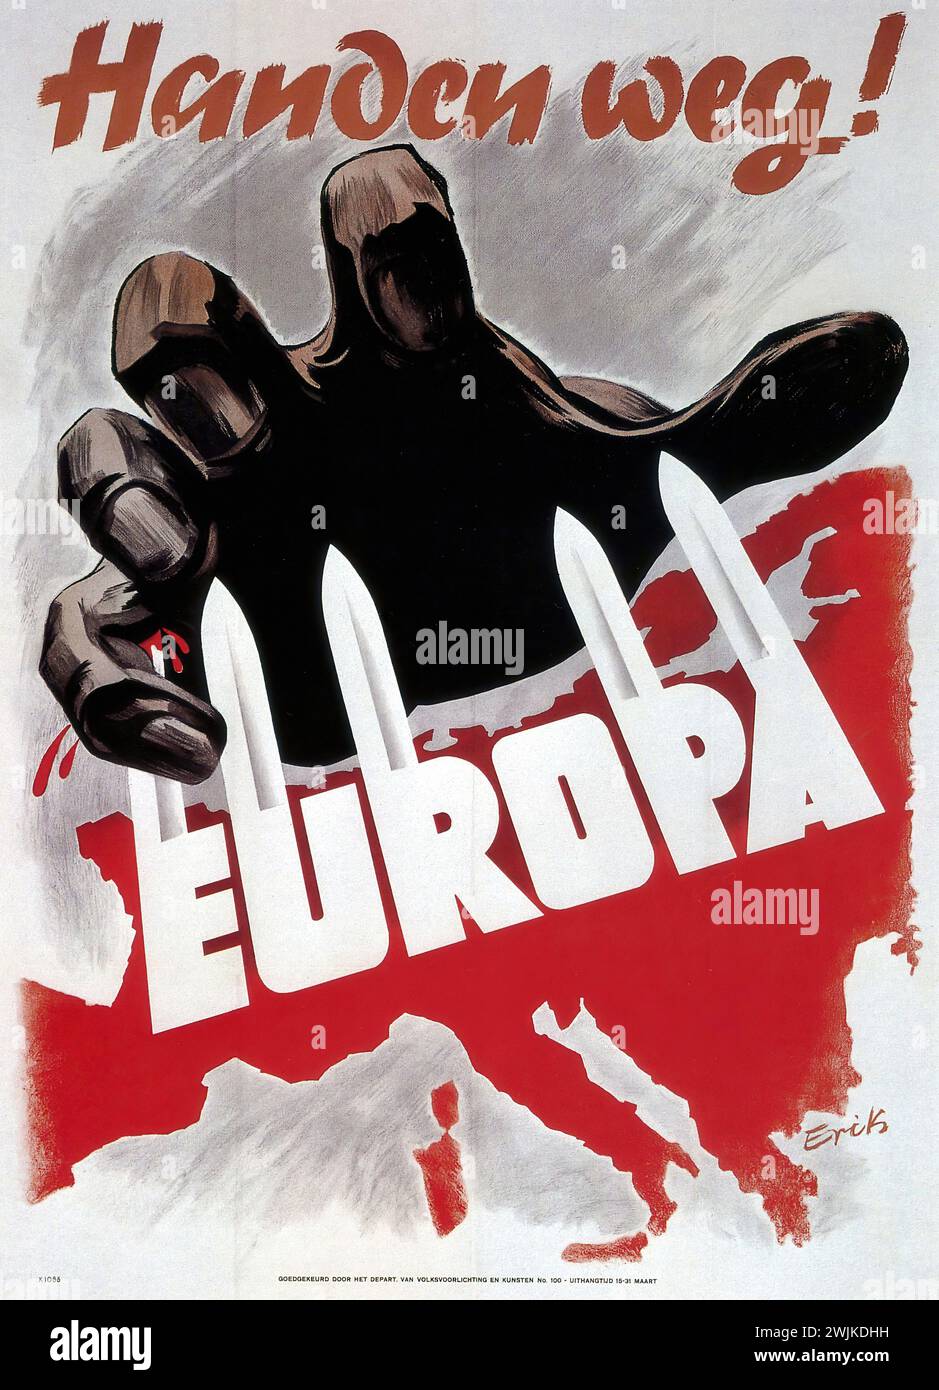 'Händen weg! EUROPA' ['Hands Off! EUROPE'] Vintage German Advertising from 1943 by Erik Hans Krause. The poster features a large hand over a red and white map of Europe, symbolizing a warning or threat. The graphic style is bold and propagandistic, common in wartime posters. Stock Photo